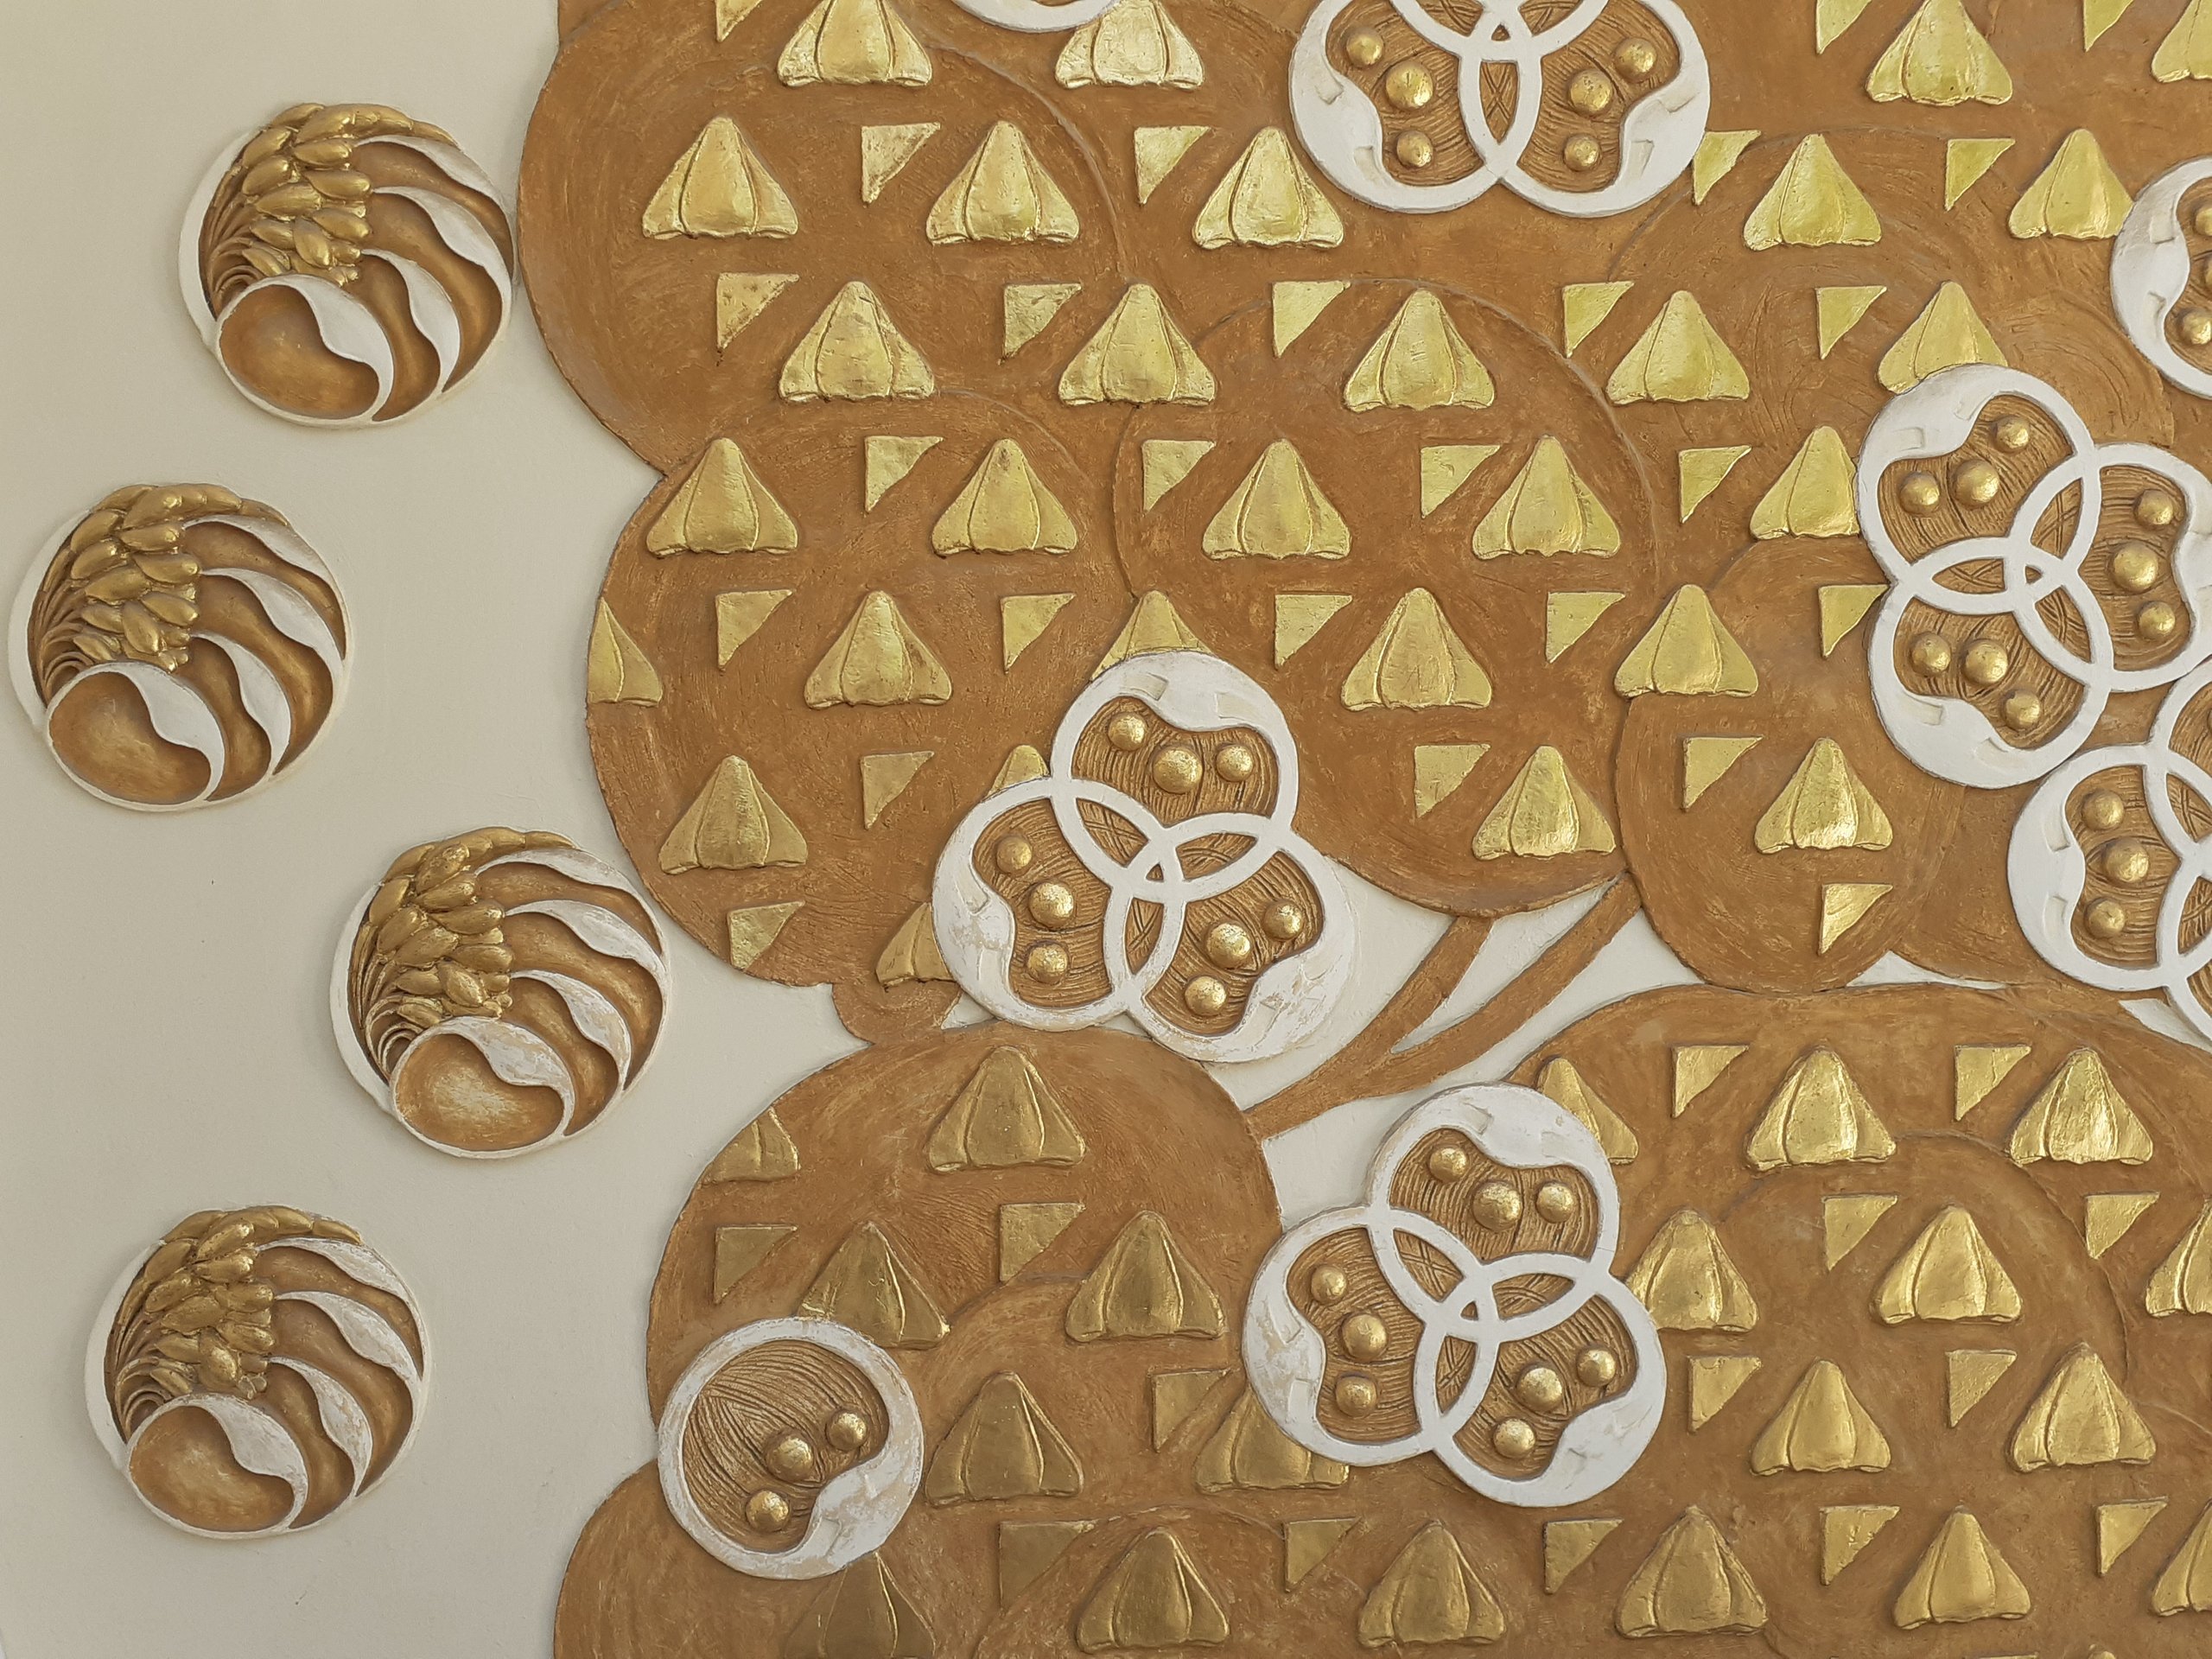 Gold and white ornaments of Mathildenhöhe Artist Colony